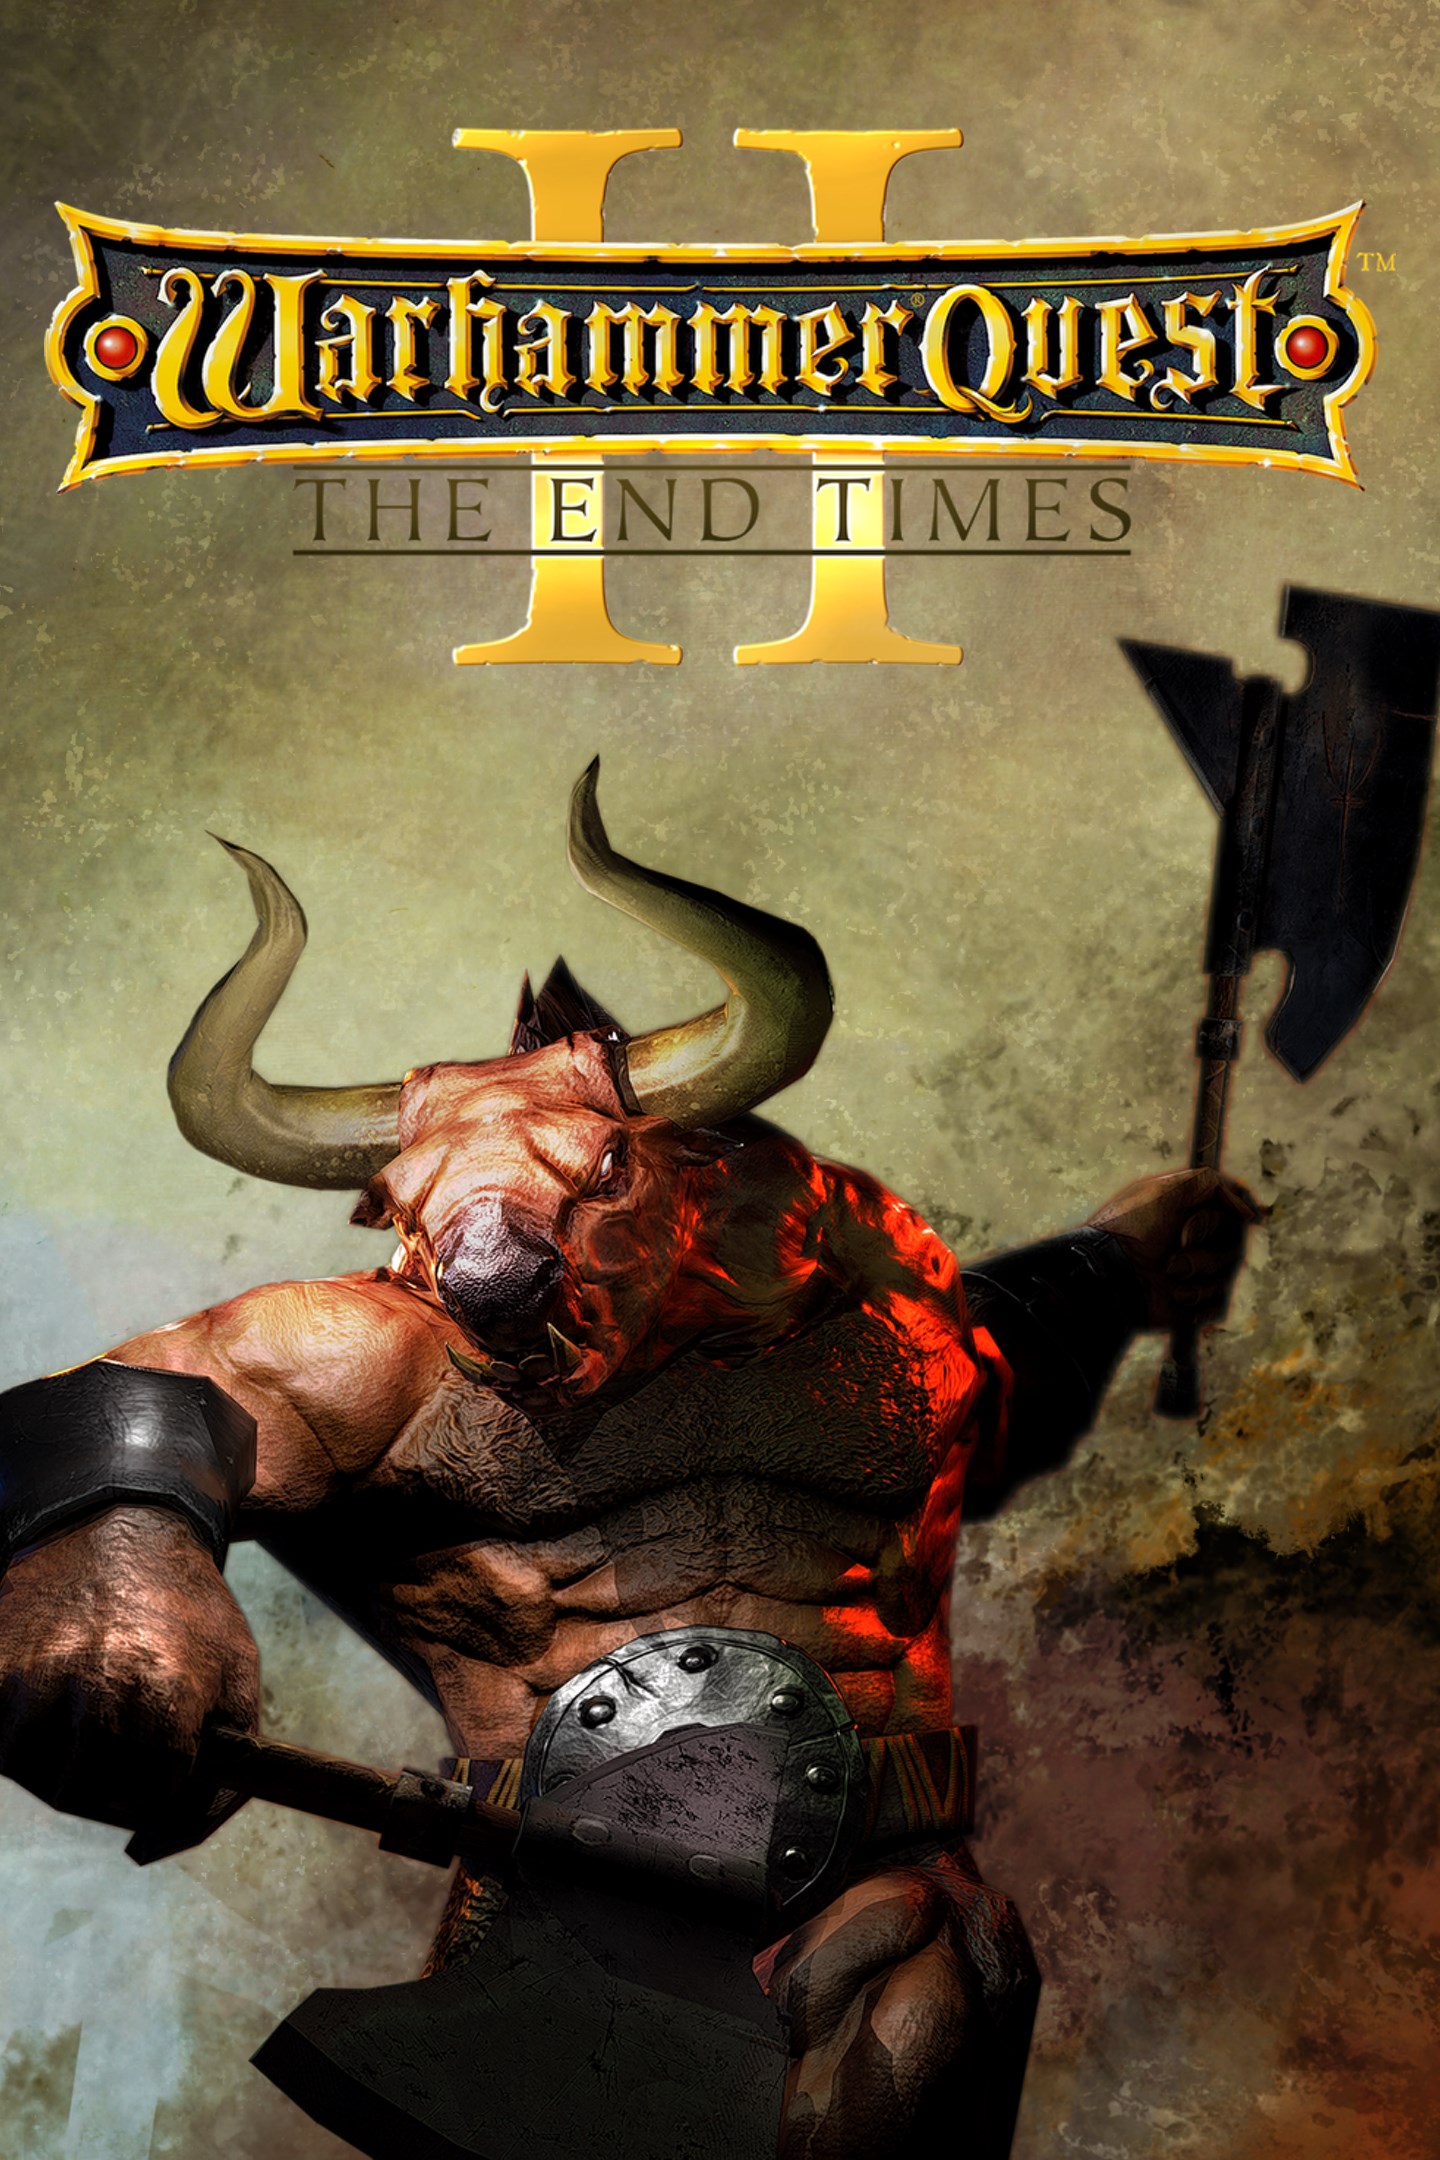 Warhammer quest 2. Warhammer Quest 2: the end times. Warhammer end times. Warhammer Quest 2: the end times ps4. End of time.